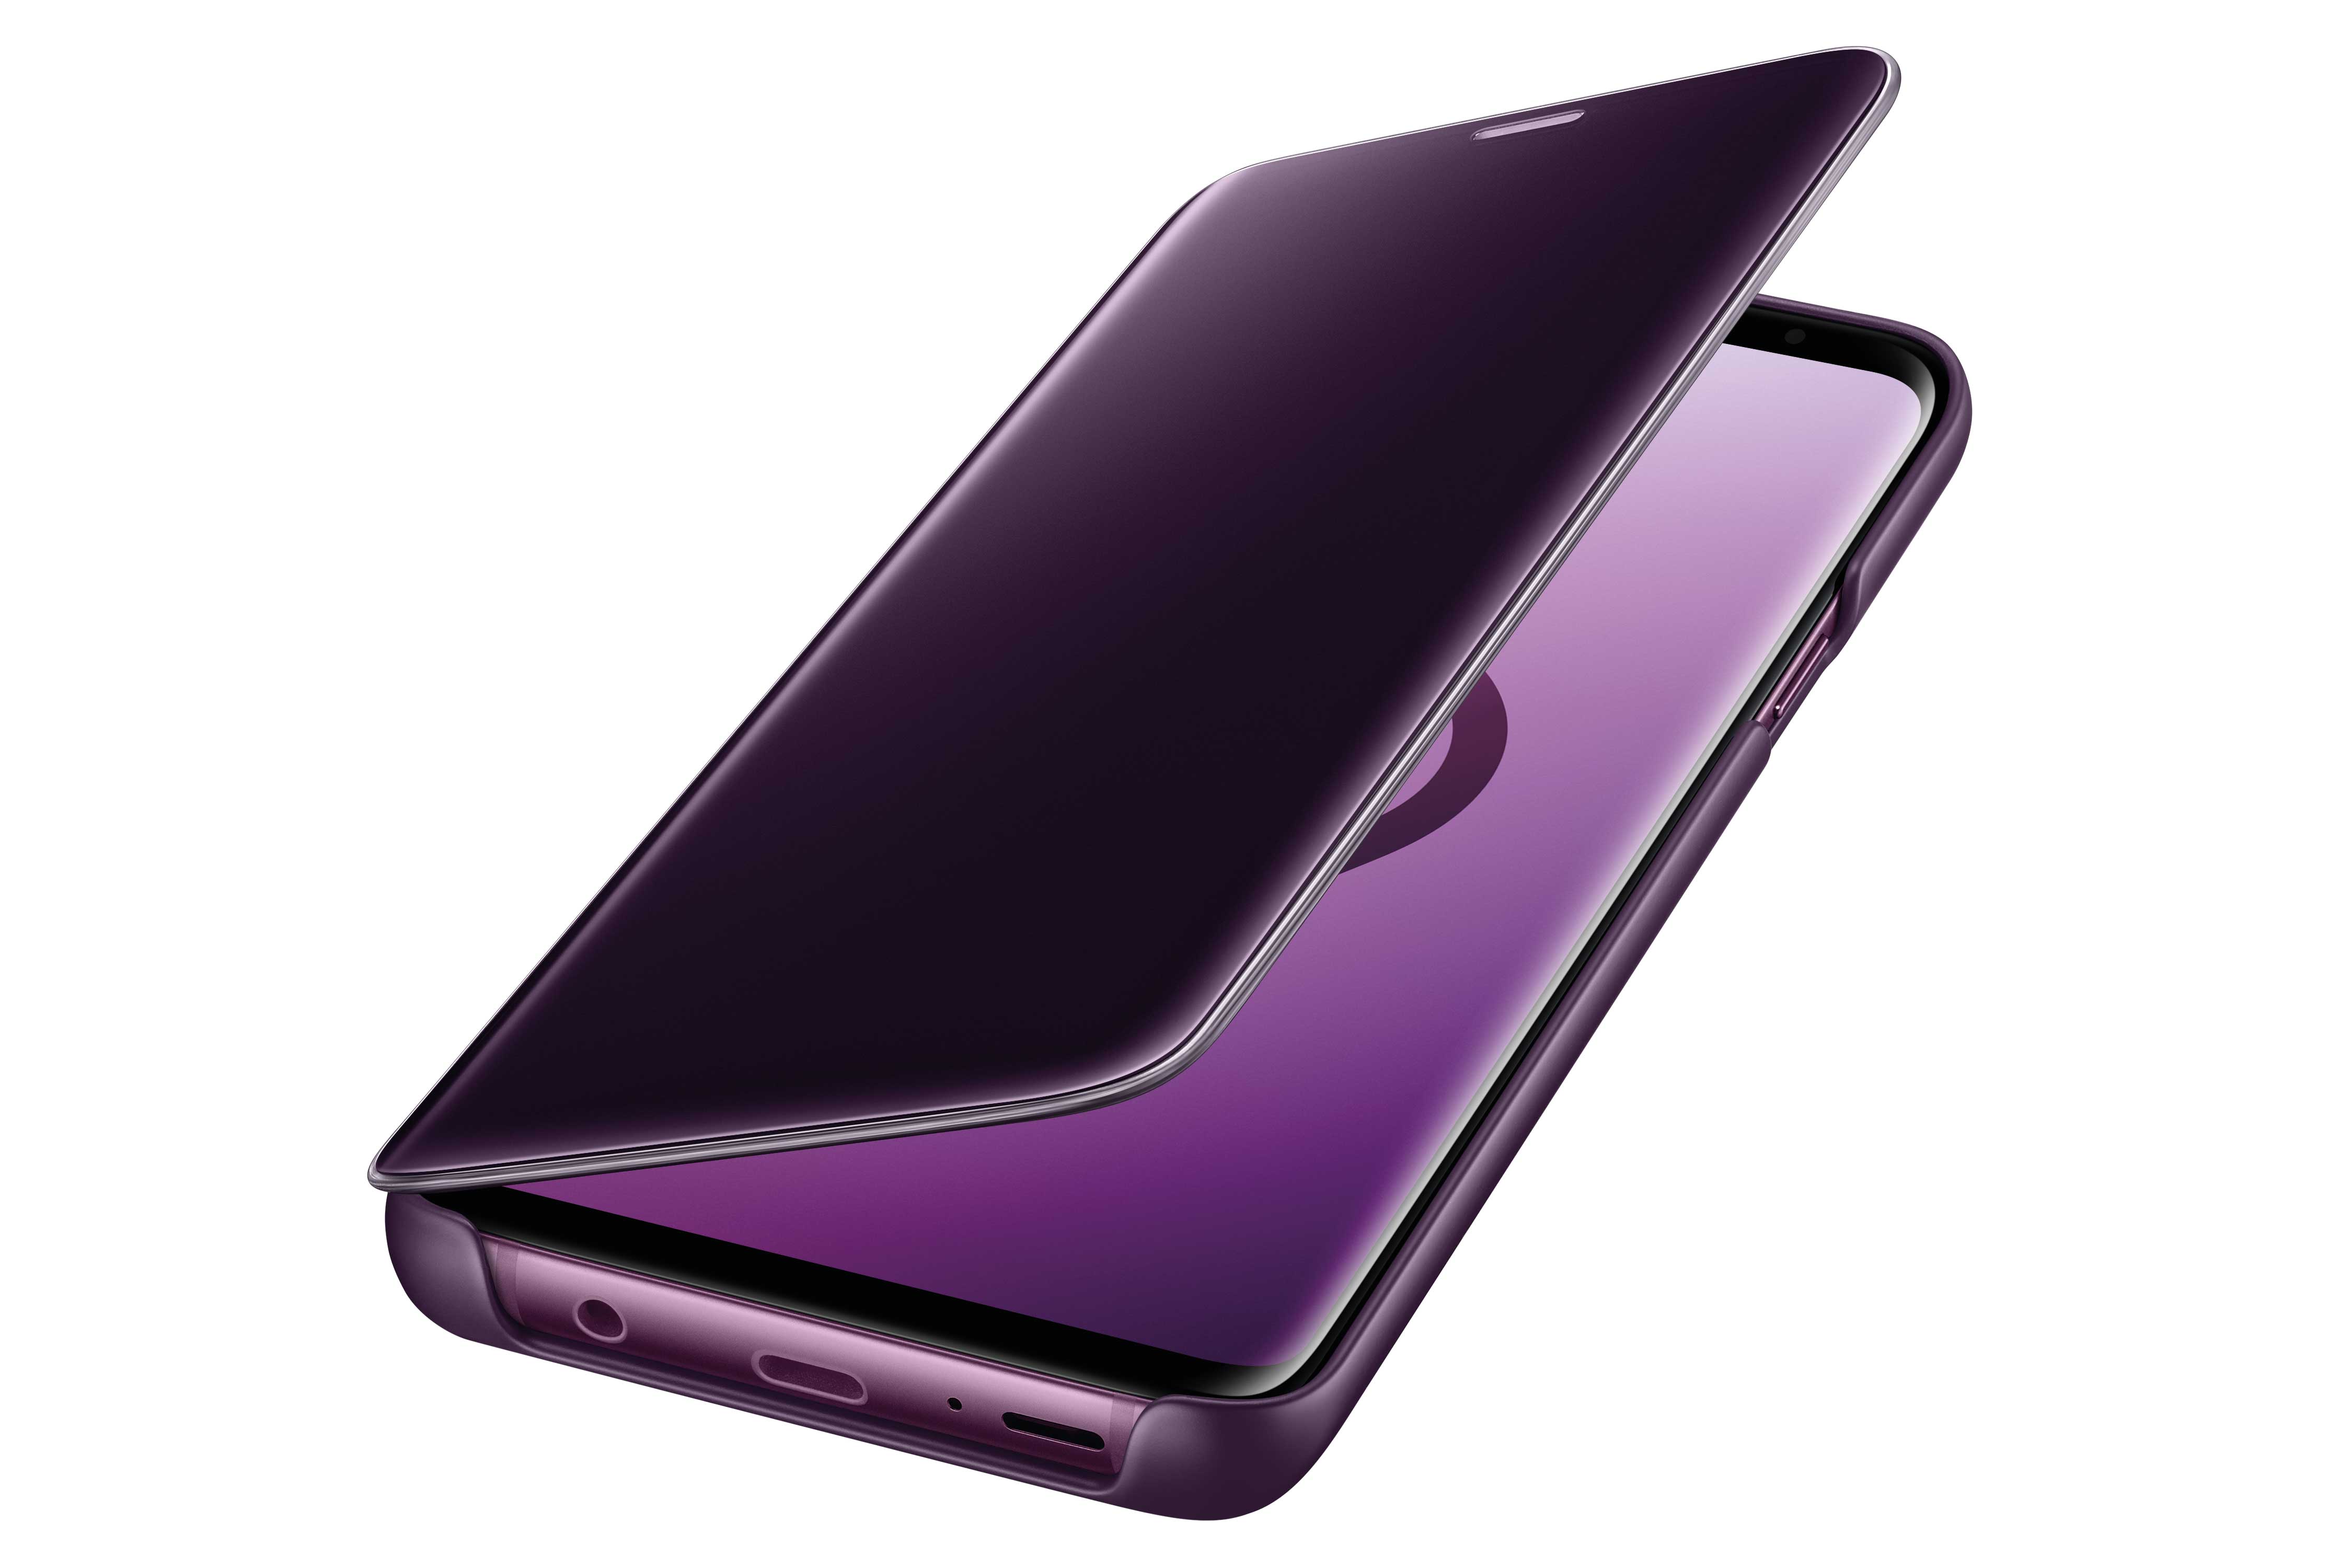 Clear View Standing Cover (Purple)